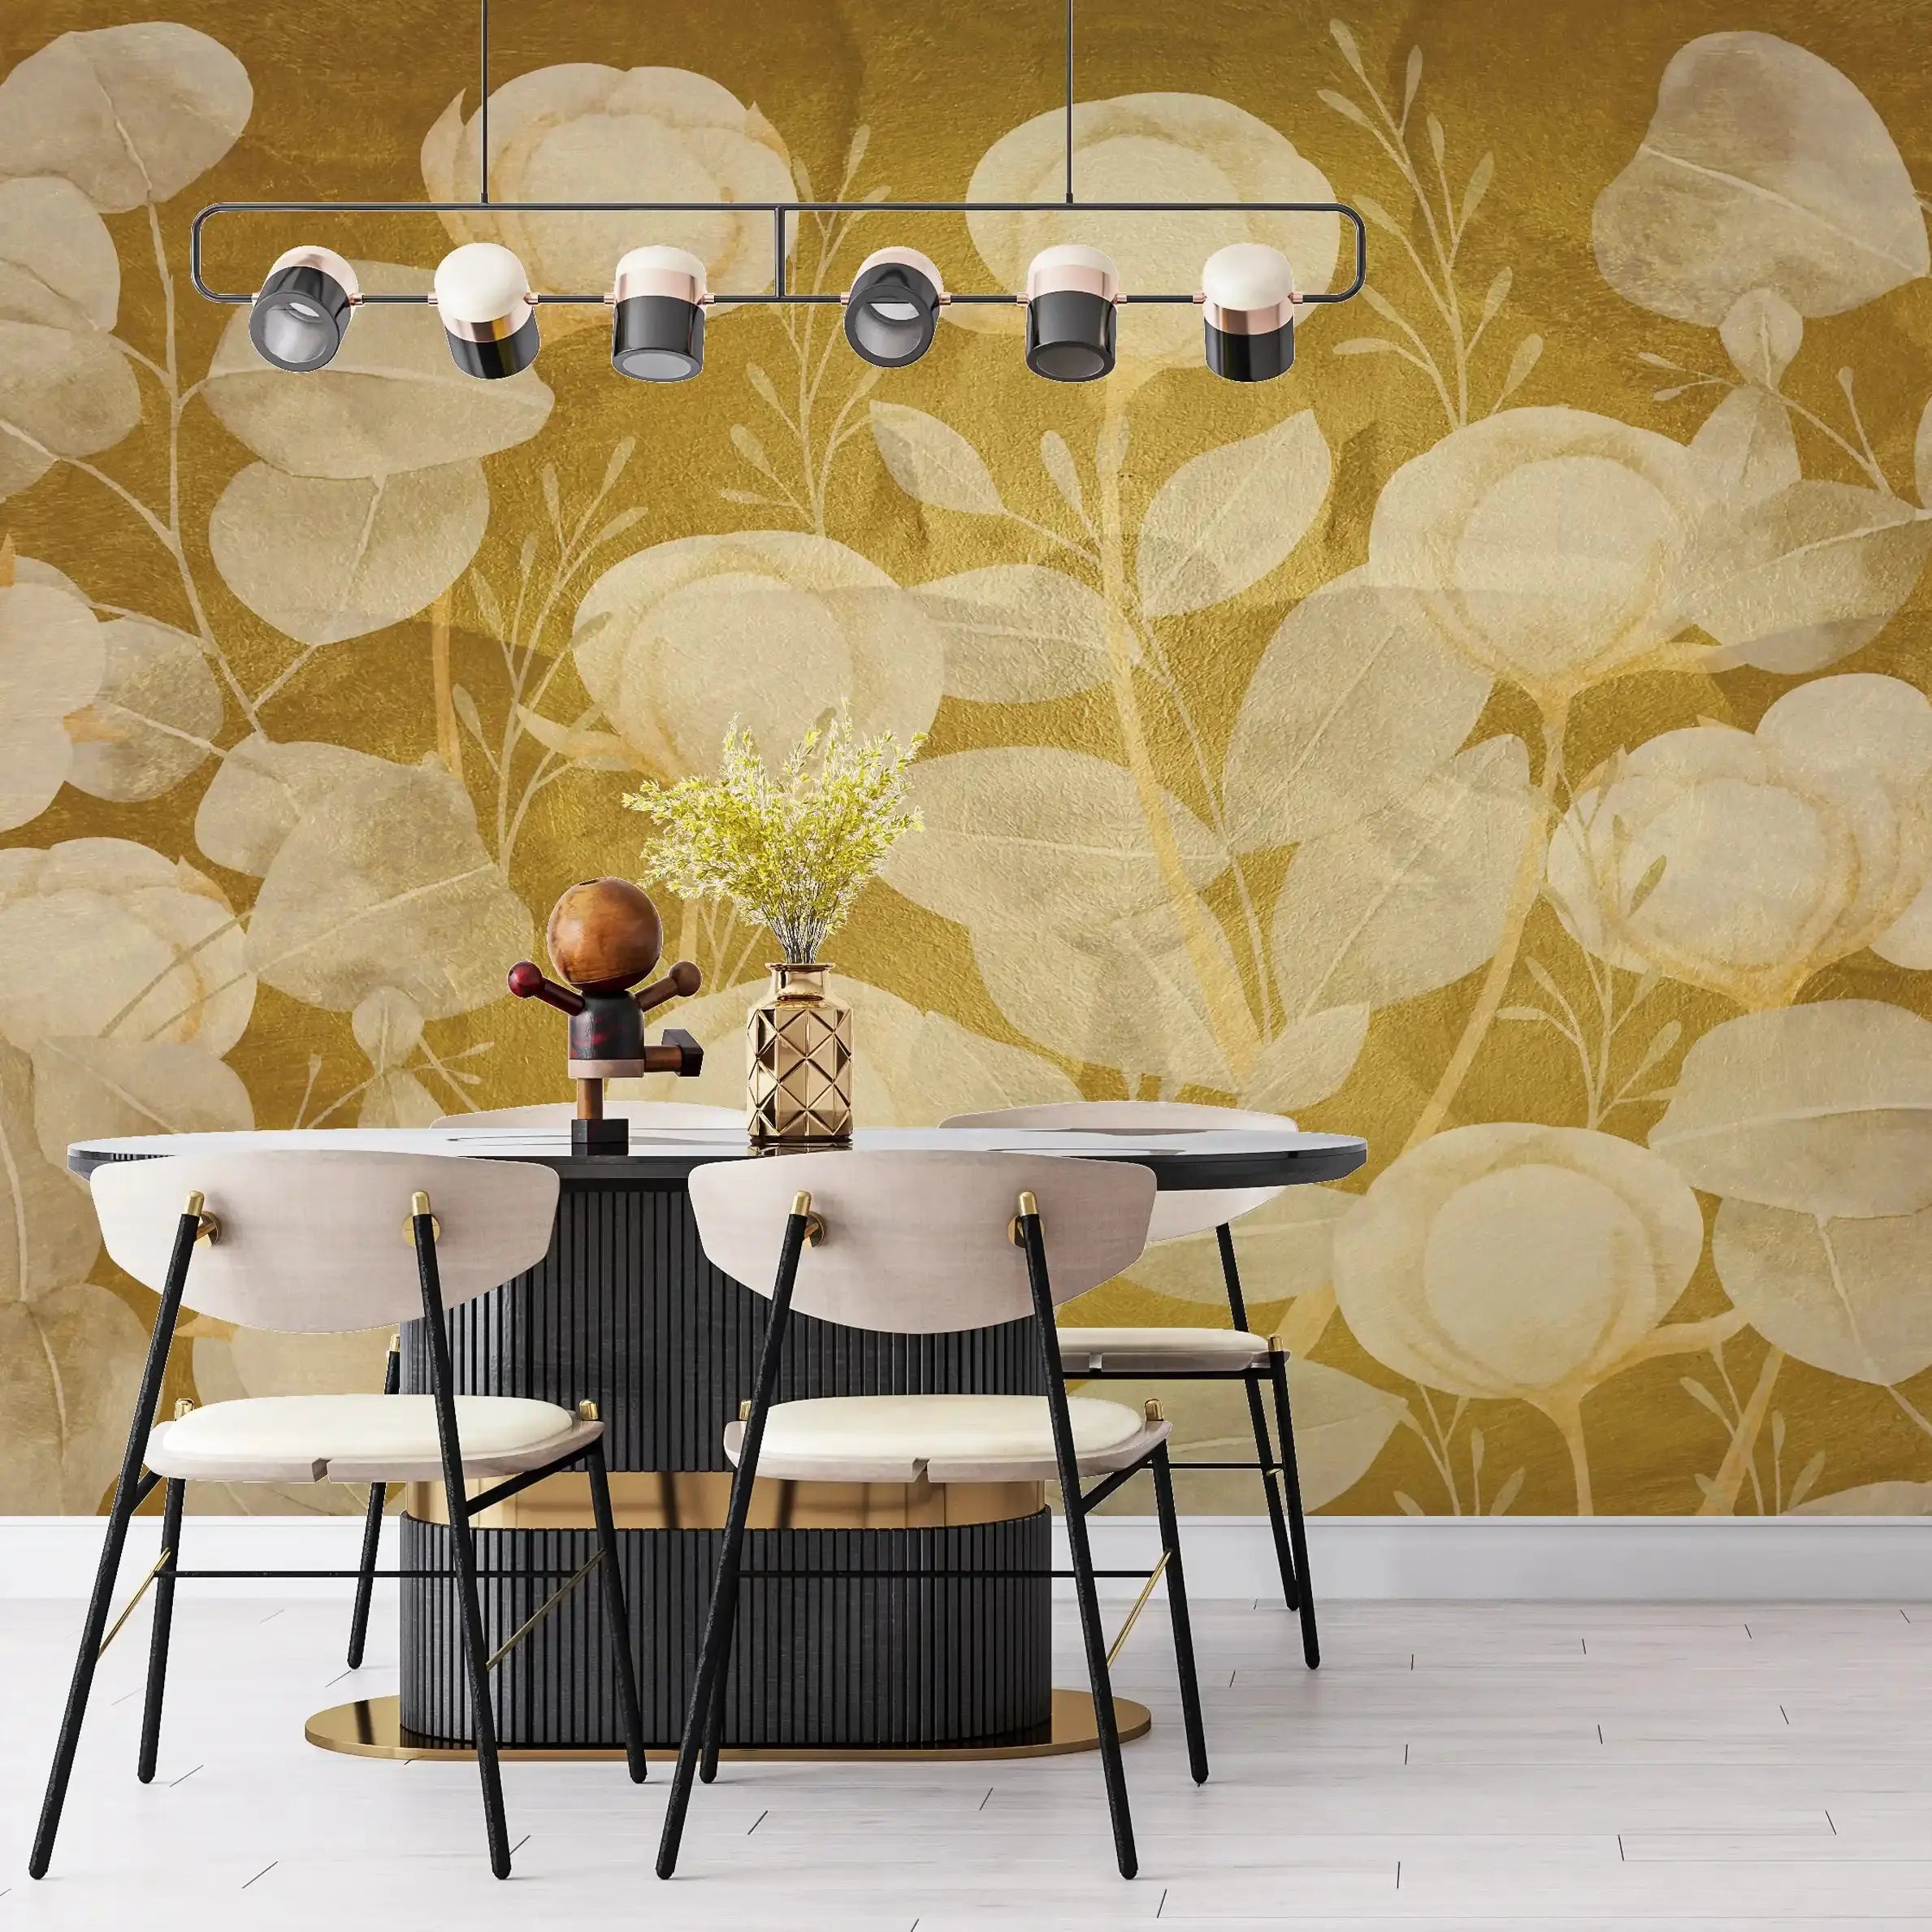 3035-E / Floral Wall Decor: Peelable, Stickable Wallpaper with Tulips Design on Gold Background, Ideal for Room Decor - Artevella